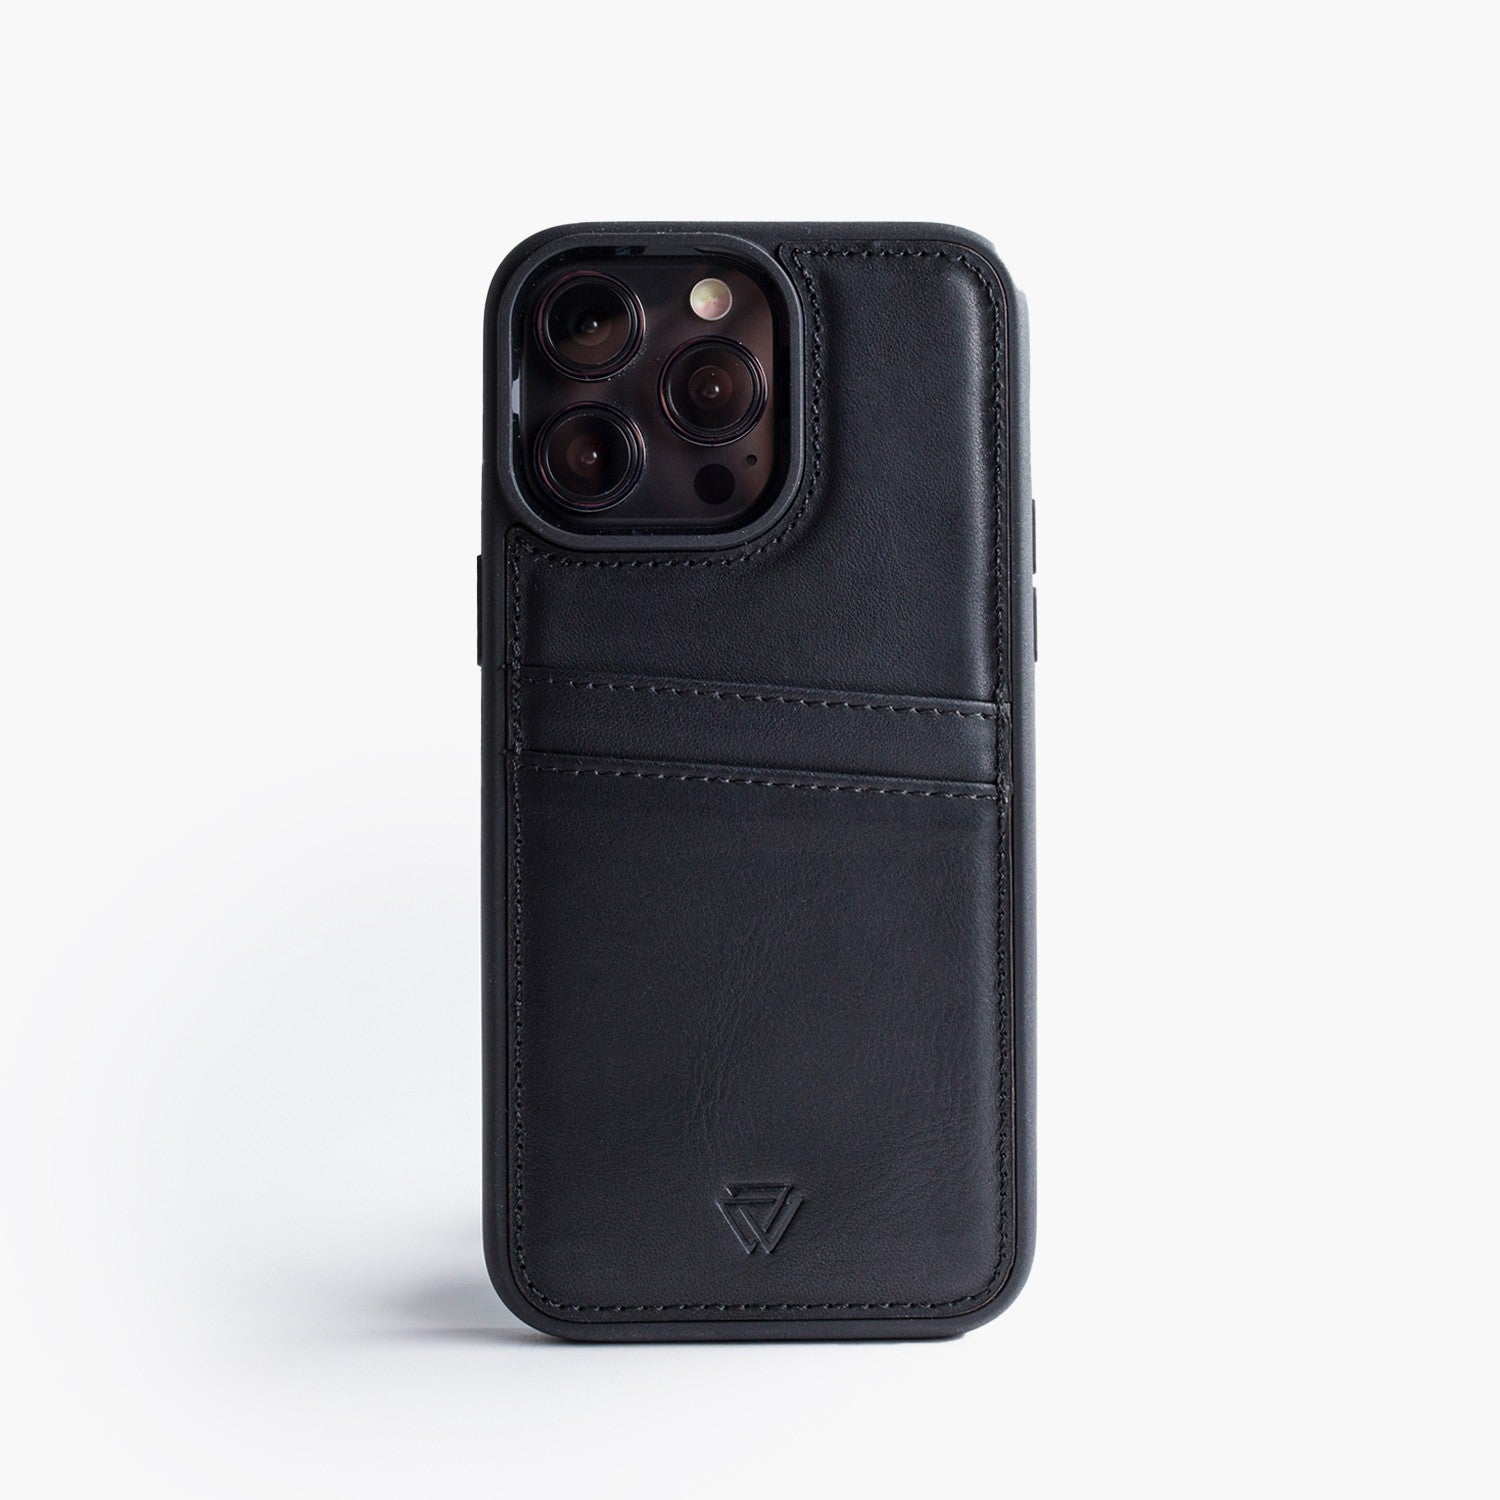 Wachikopa leather Back Cover C.C. Case for iPhone 12 Pro Black